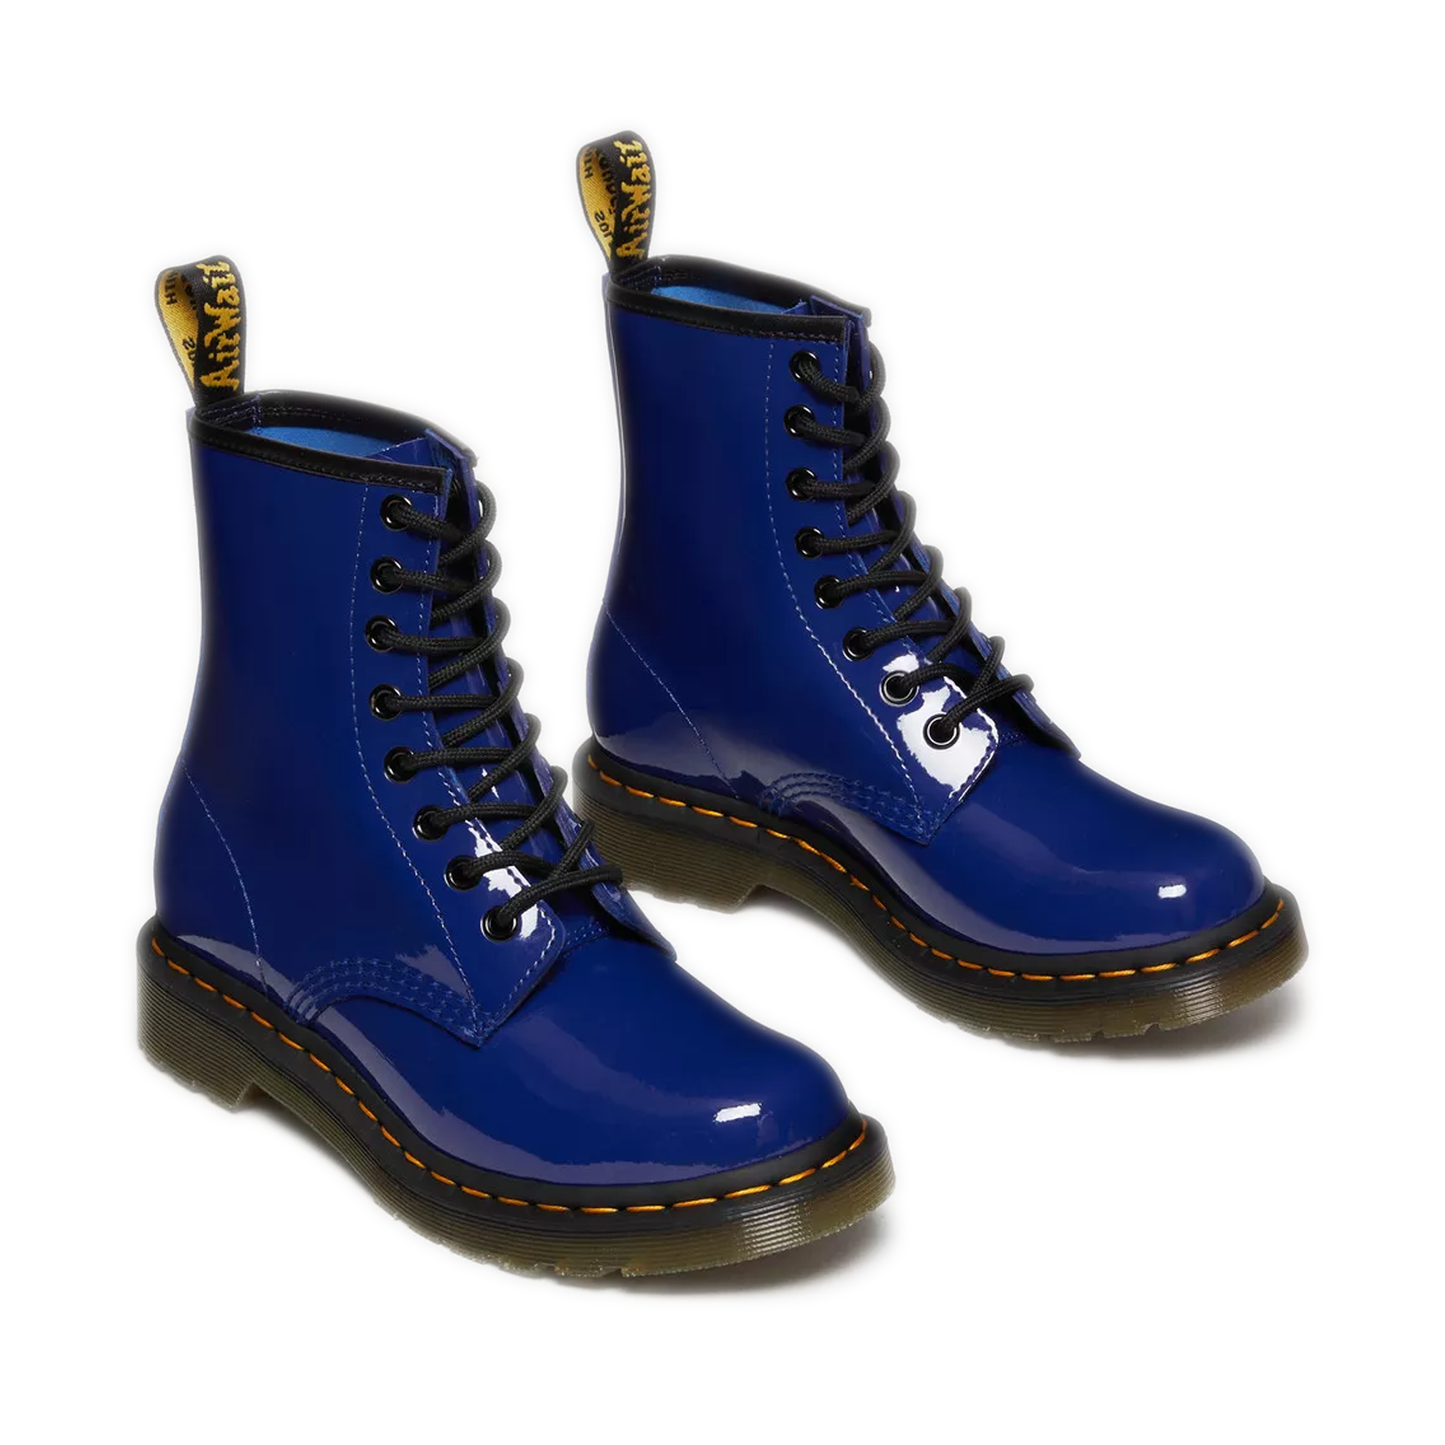 Women's Dr. Martens 1460 Patent Leather Lace Up Boots - Blue Lucido/ Patent Lamper